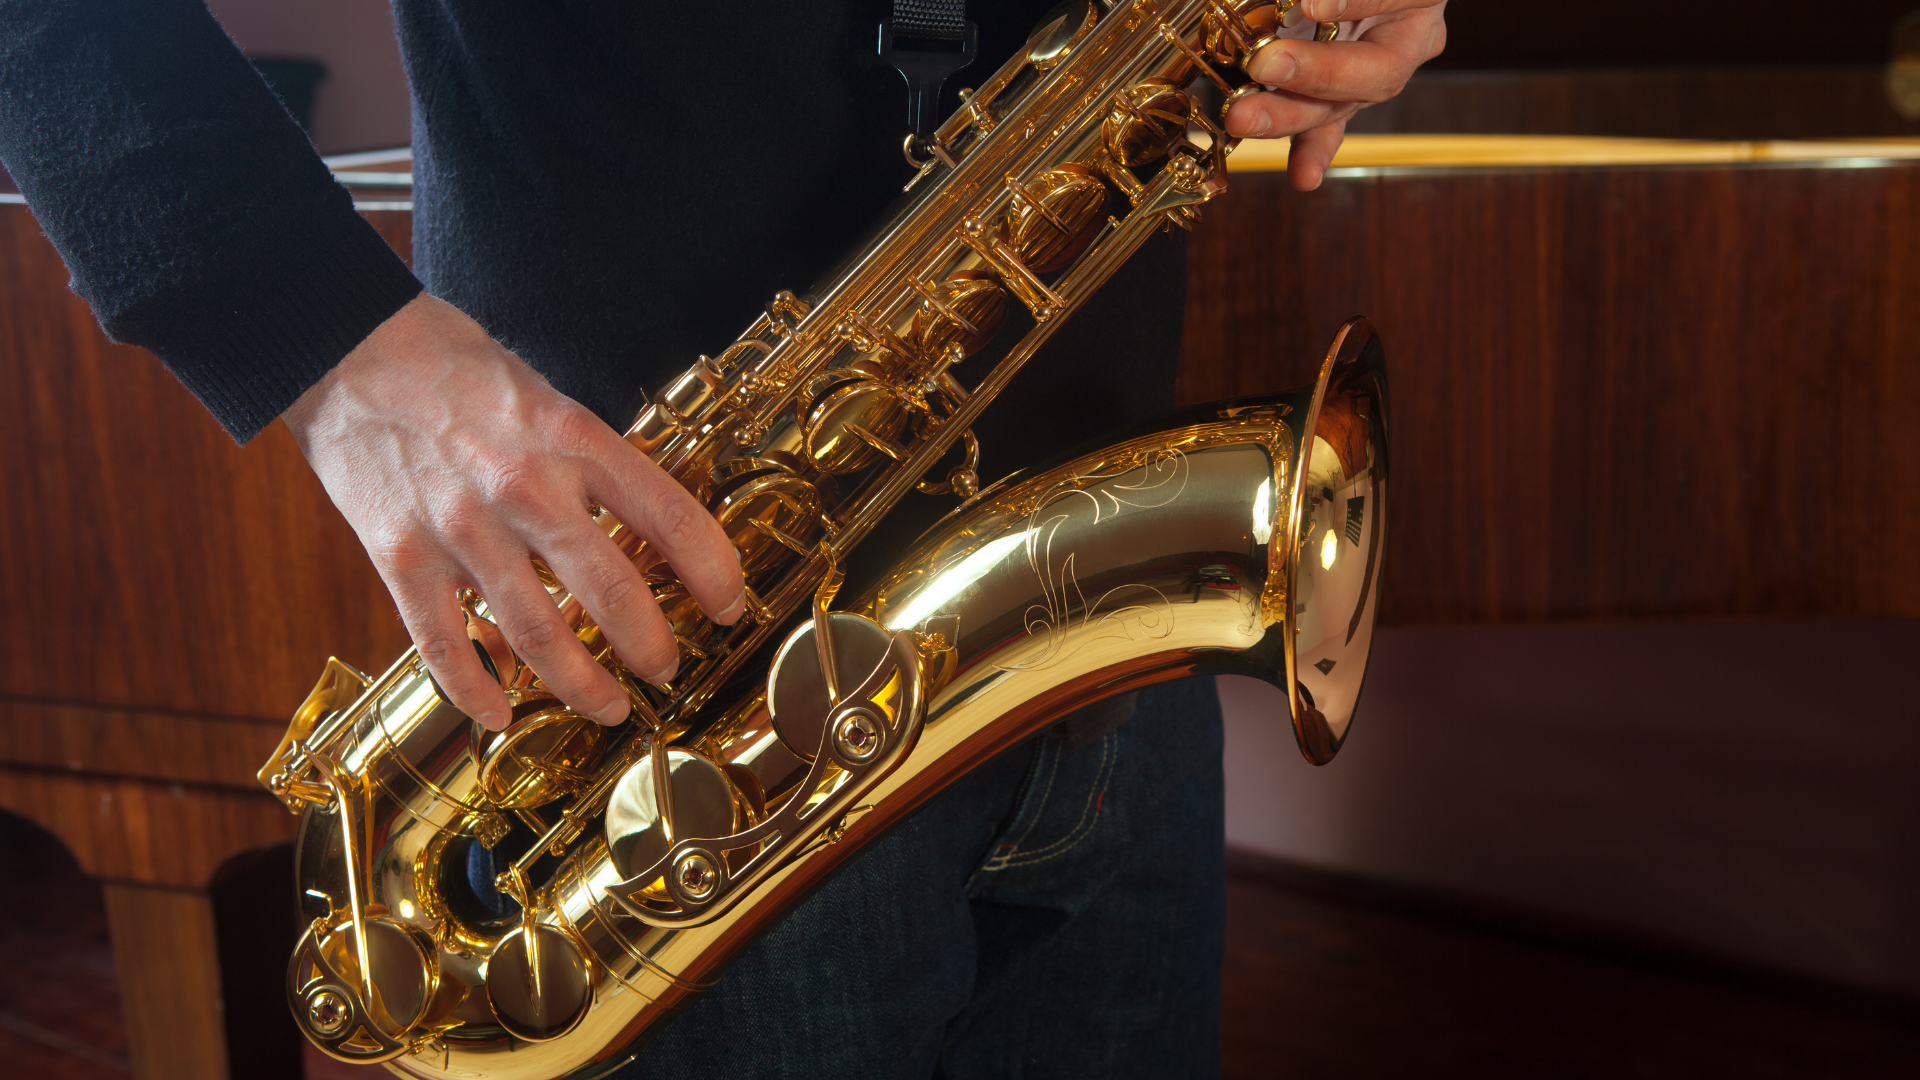 When Thinking About Learning the Saxophone, Why Should I Choose the Xaphoon Pocket Sax?